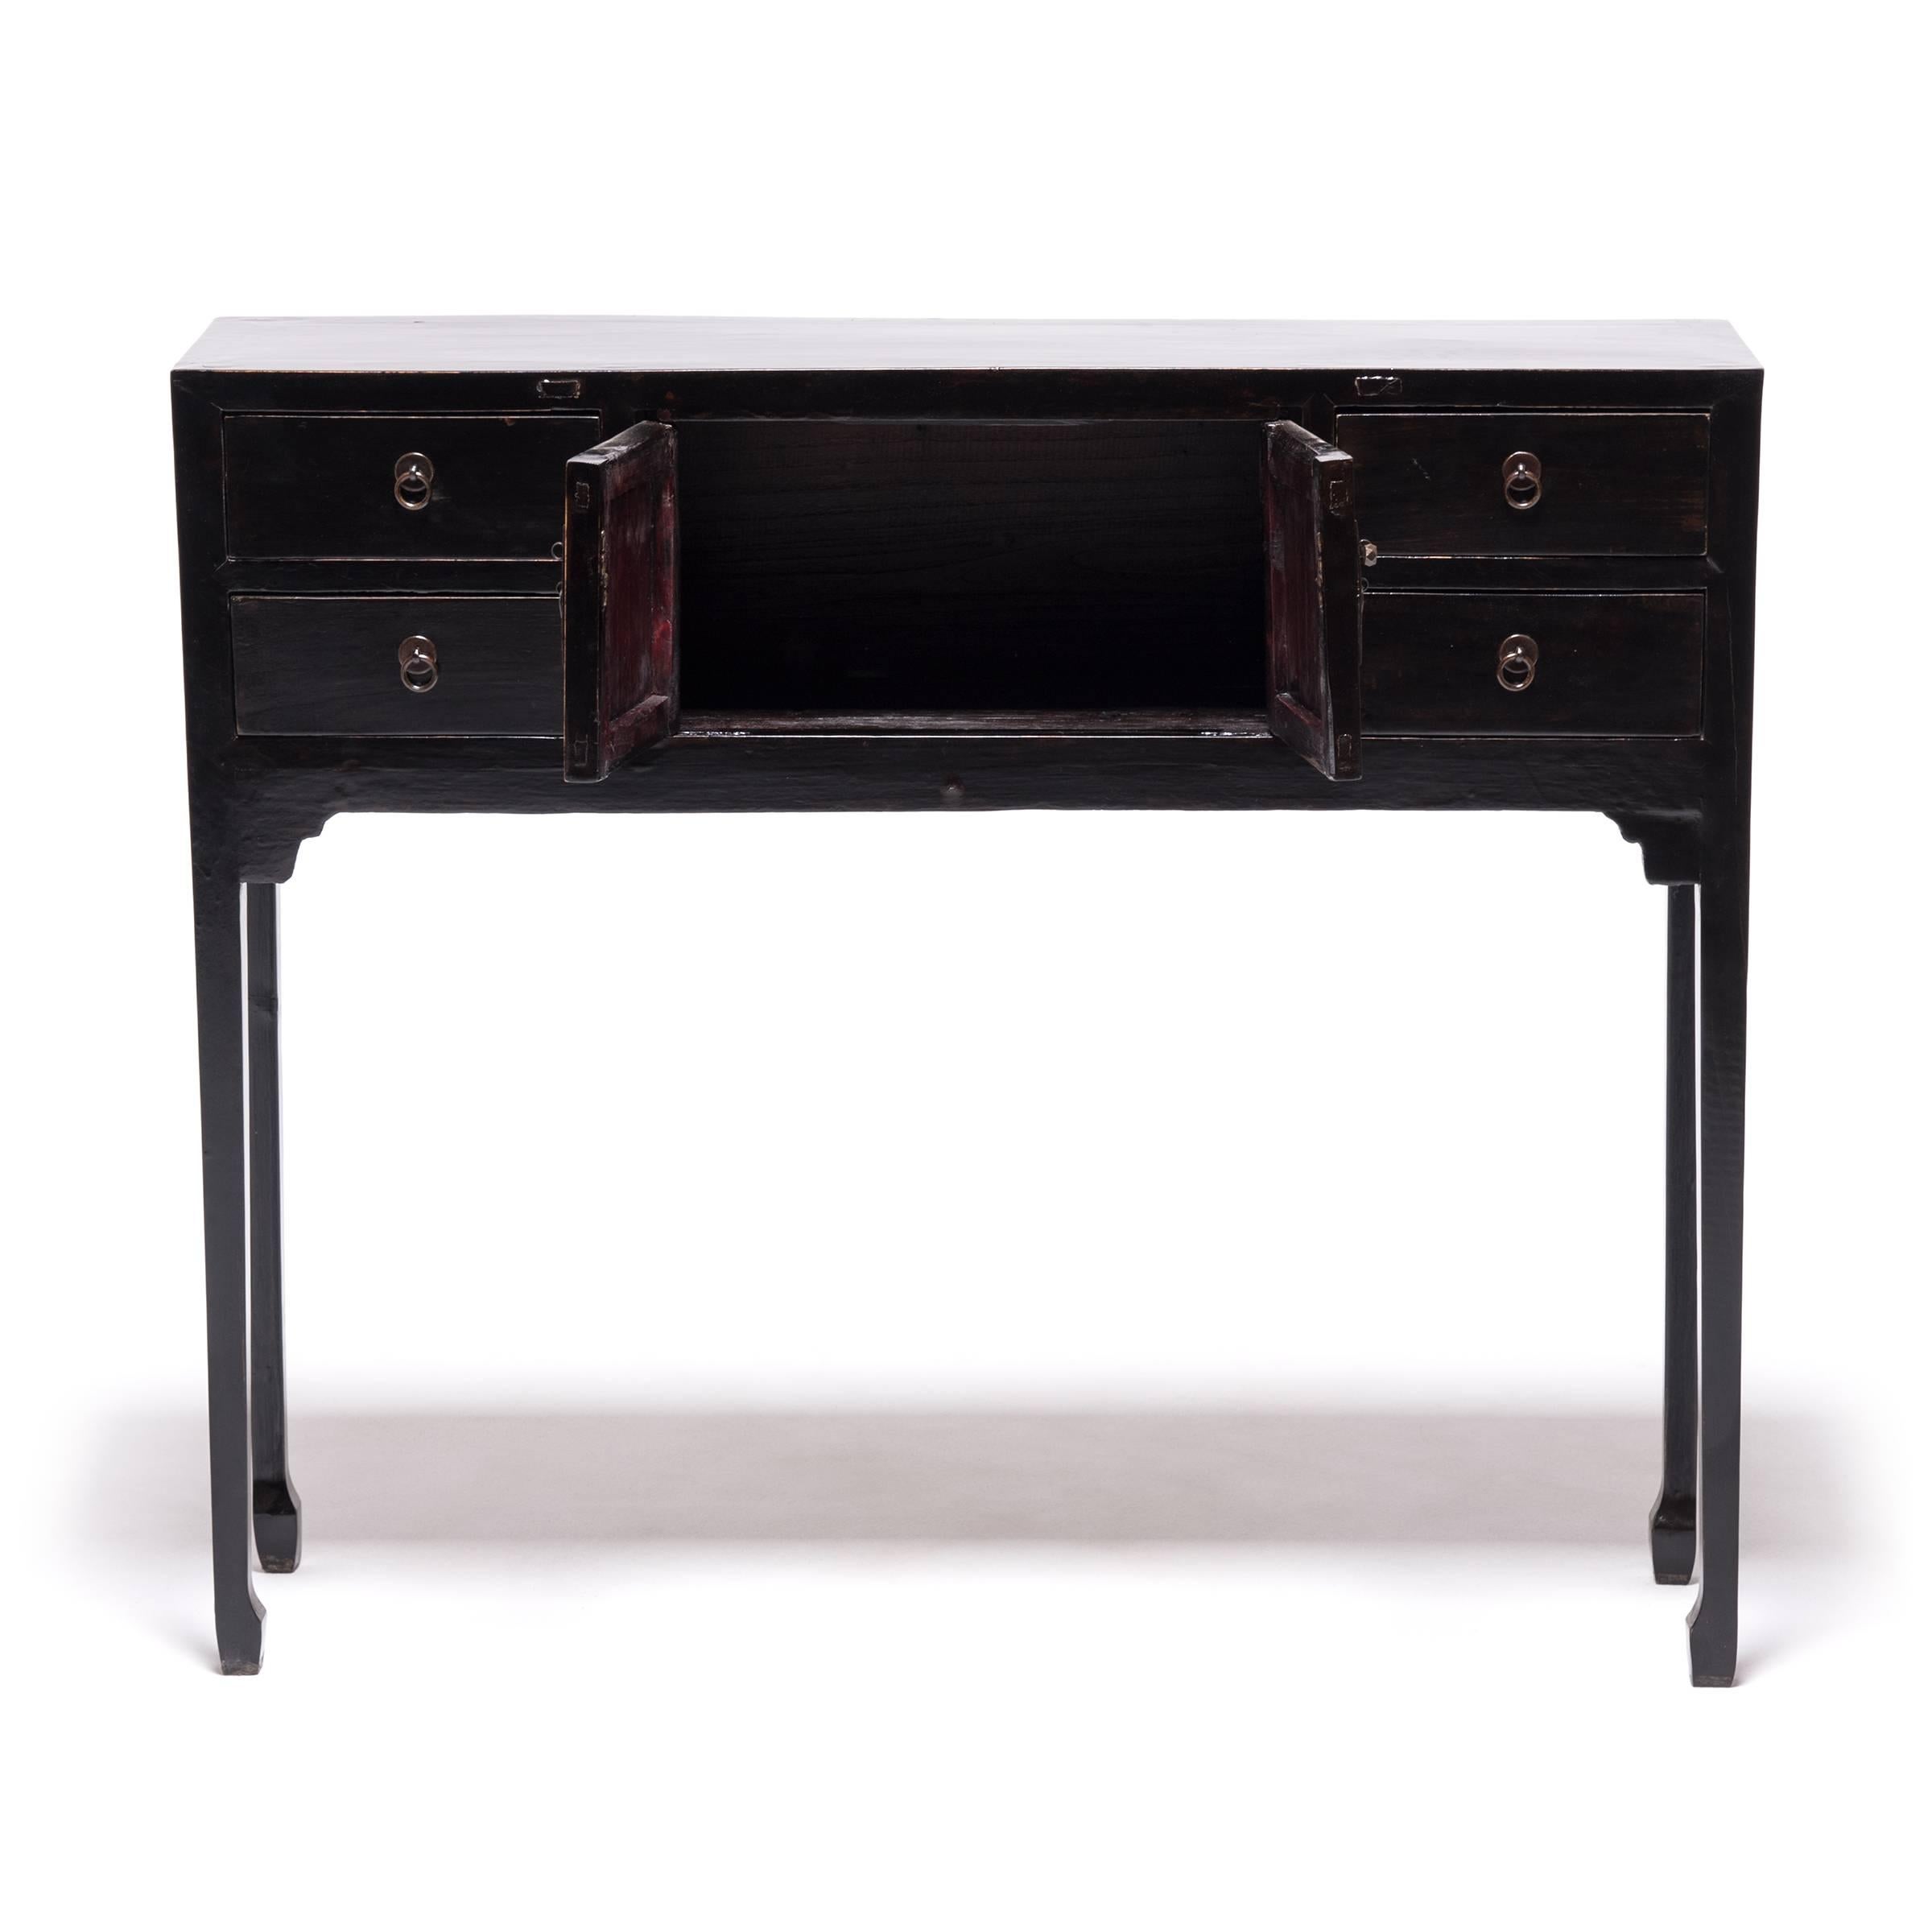 This 19th century altar coffer features clean lines in the Ming manner. It would have originally been used as storage next to a kang platform in a woman's sleeping quarters. Our carpenters, skilled in traditional methods, elongated the legs to make